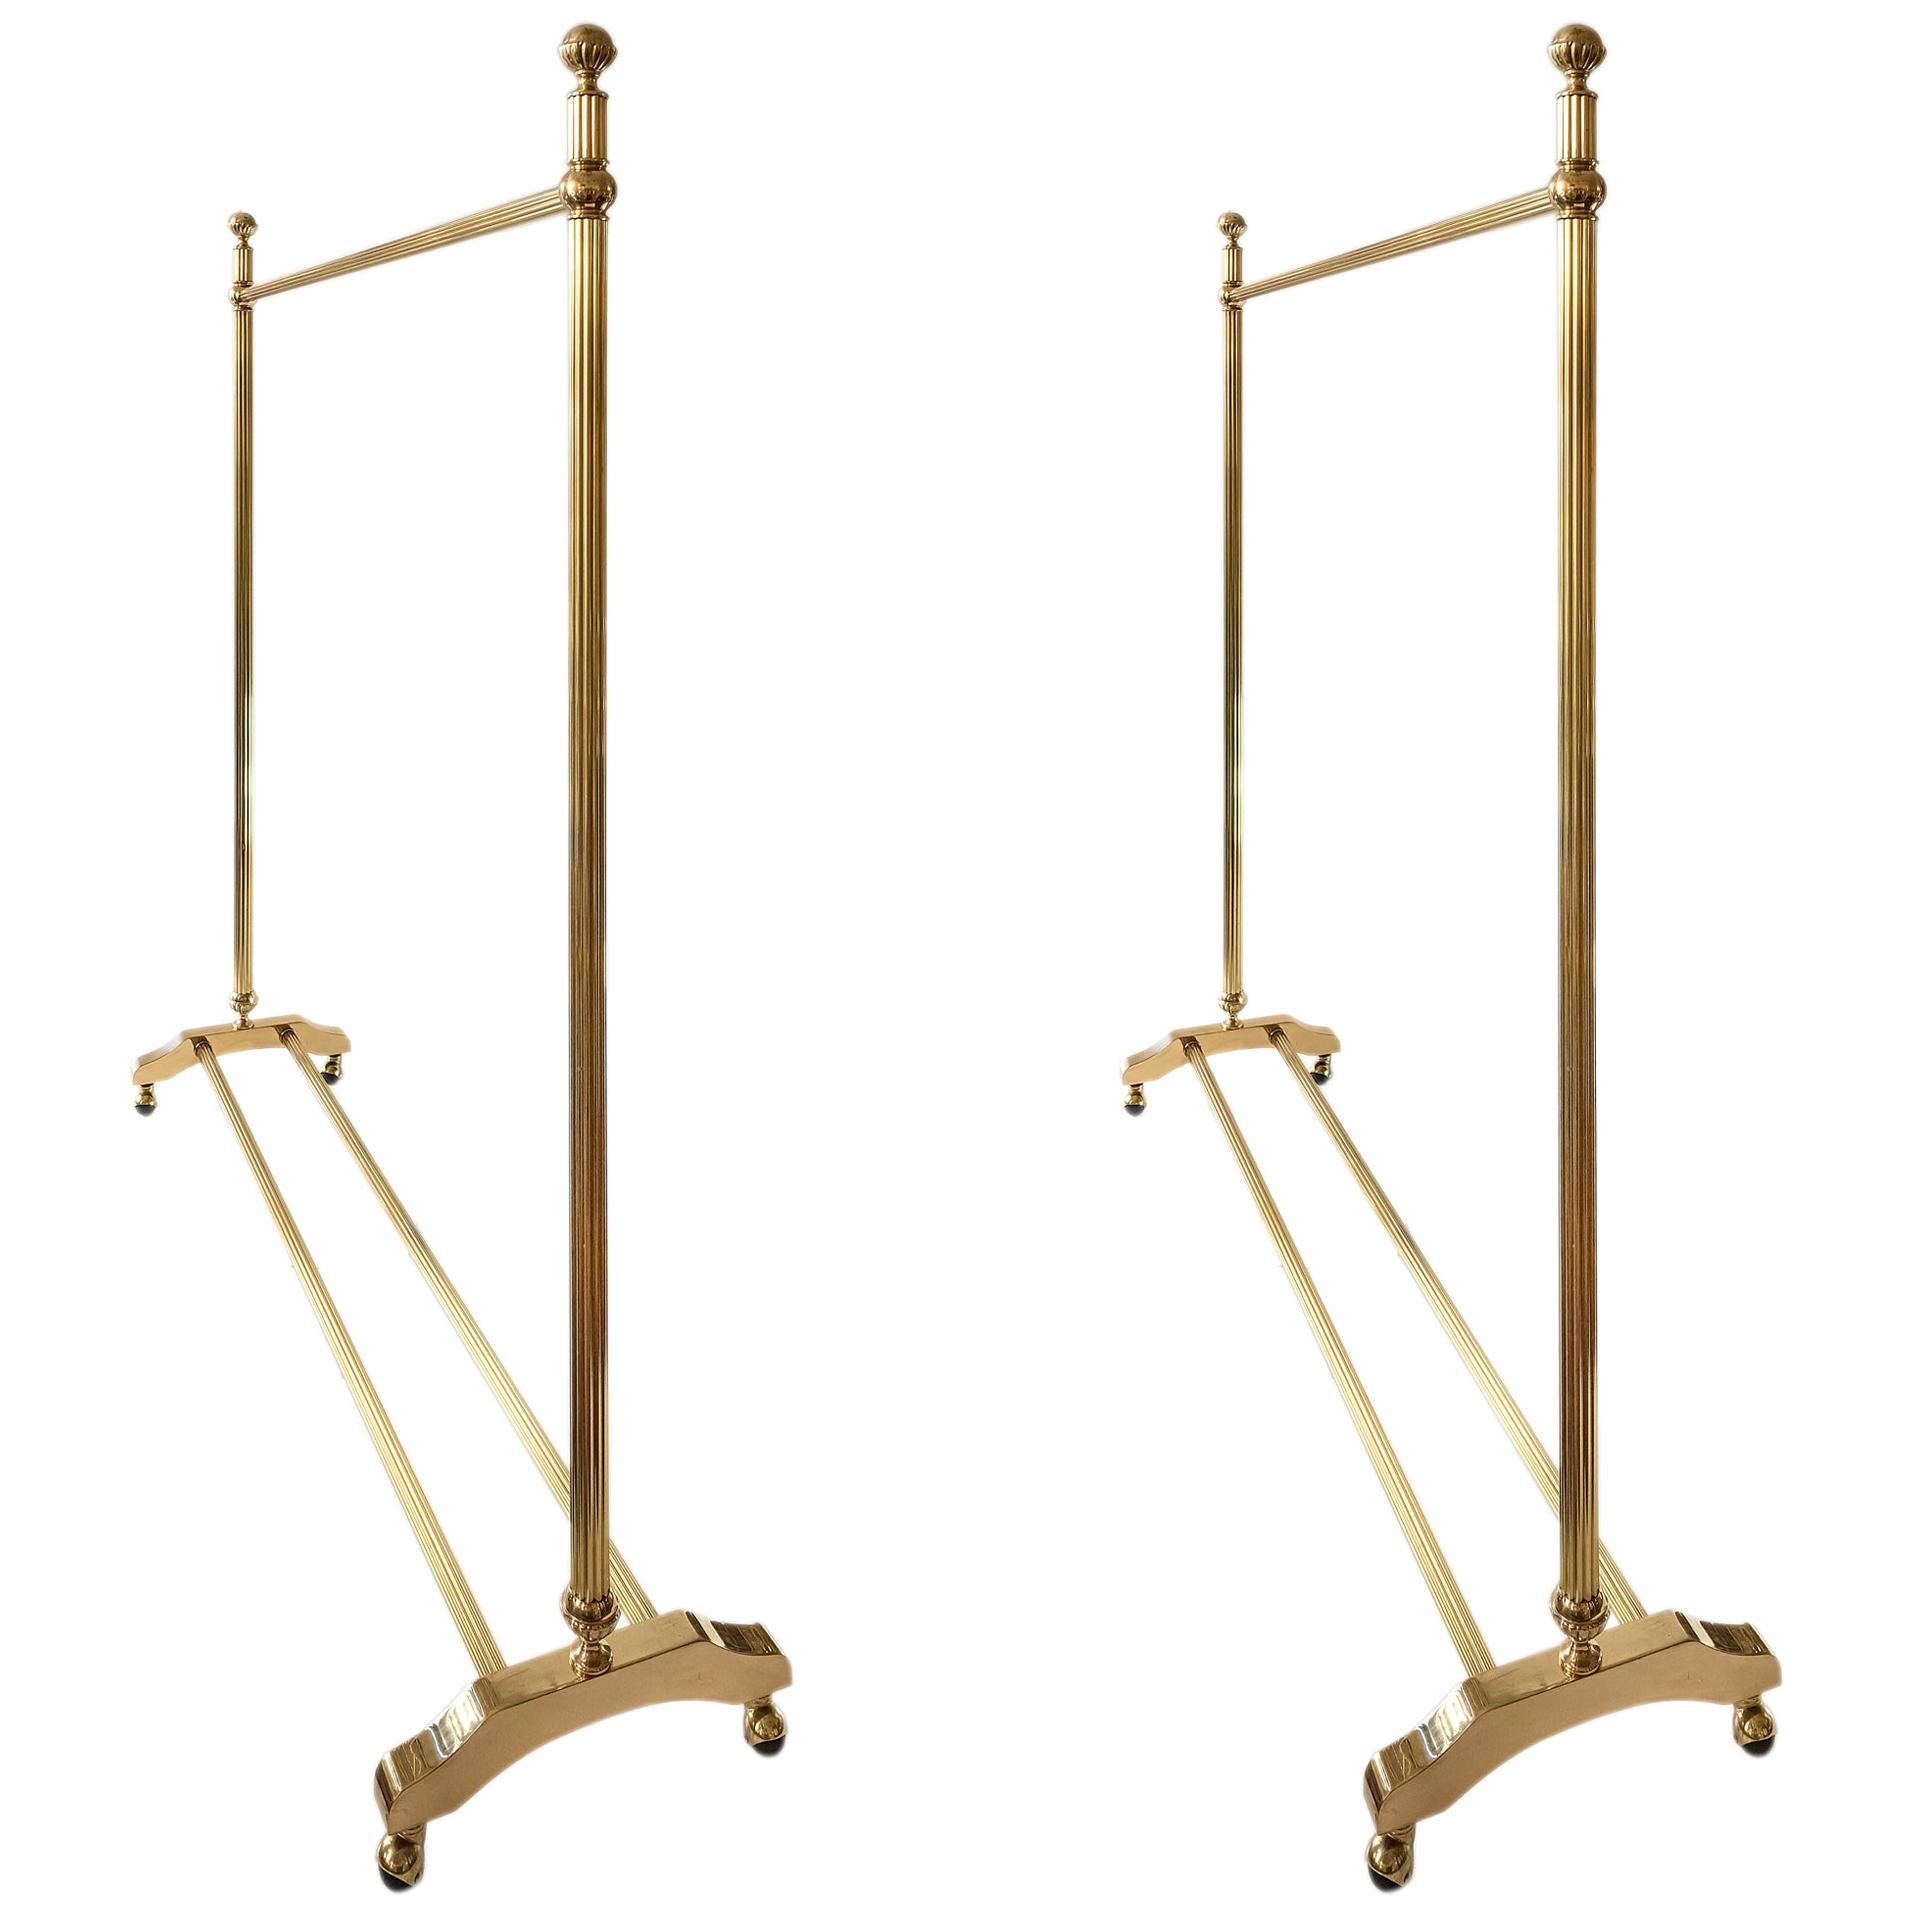 Pair of Midcentury Italian Brass Coat/Clothes Rack Stand